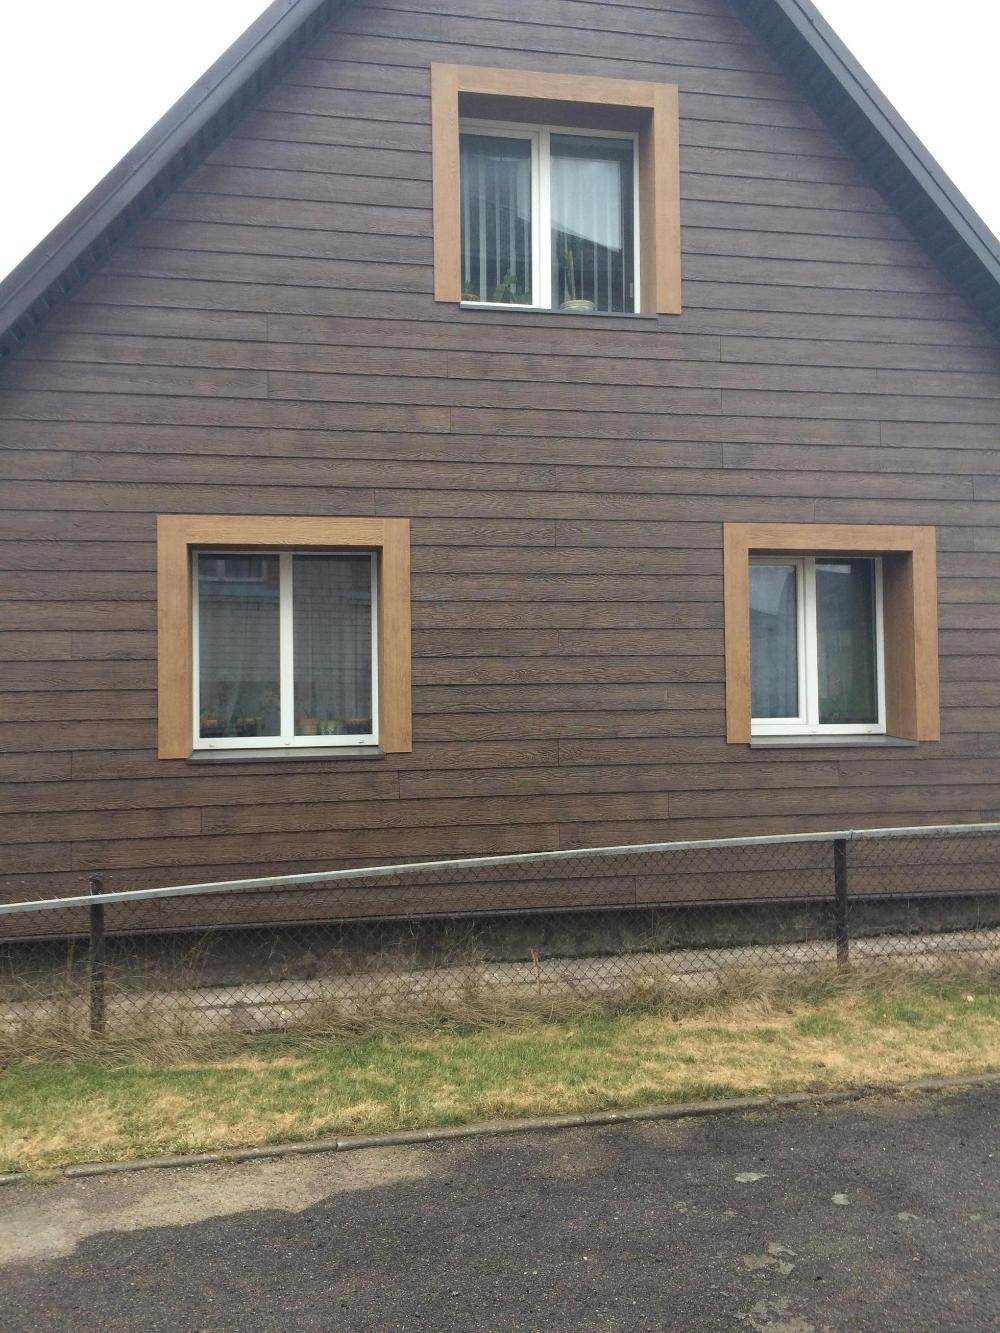 Exterior siding on a house in Lithuania using SHERA fibre cement plank